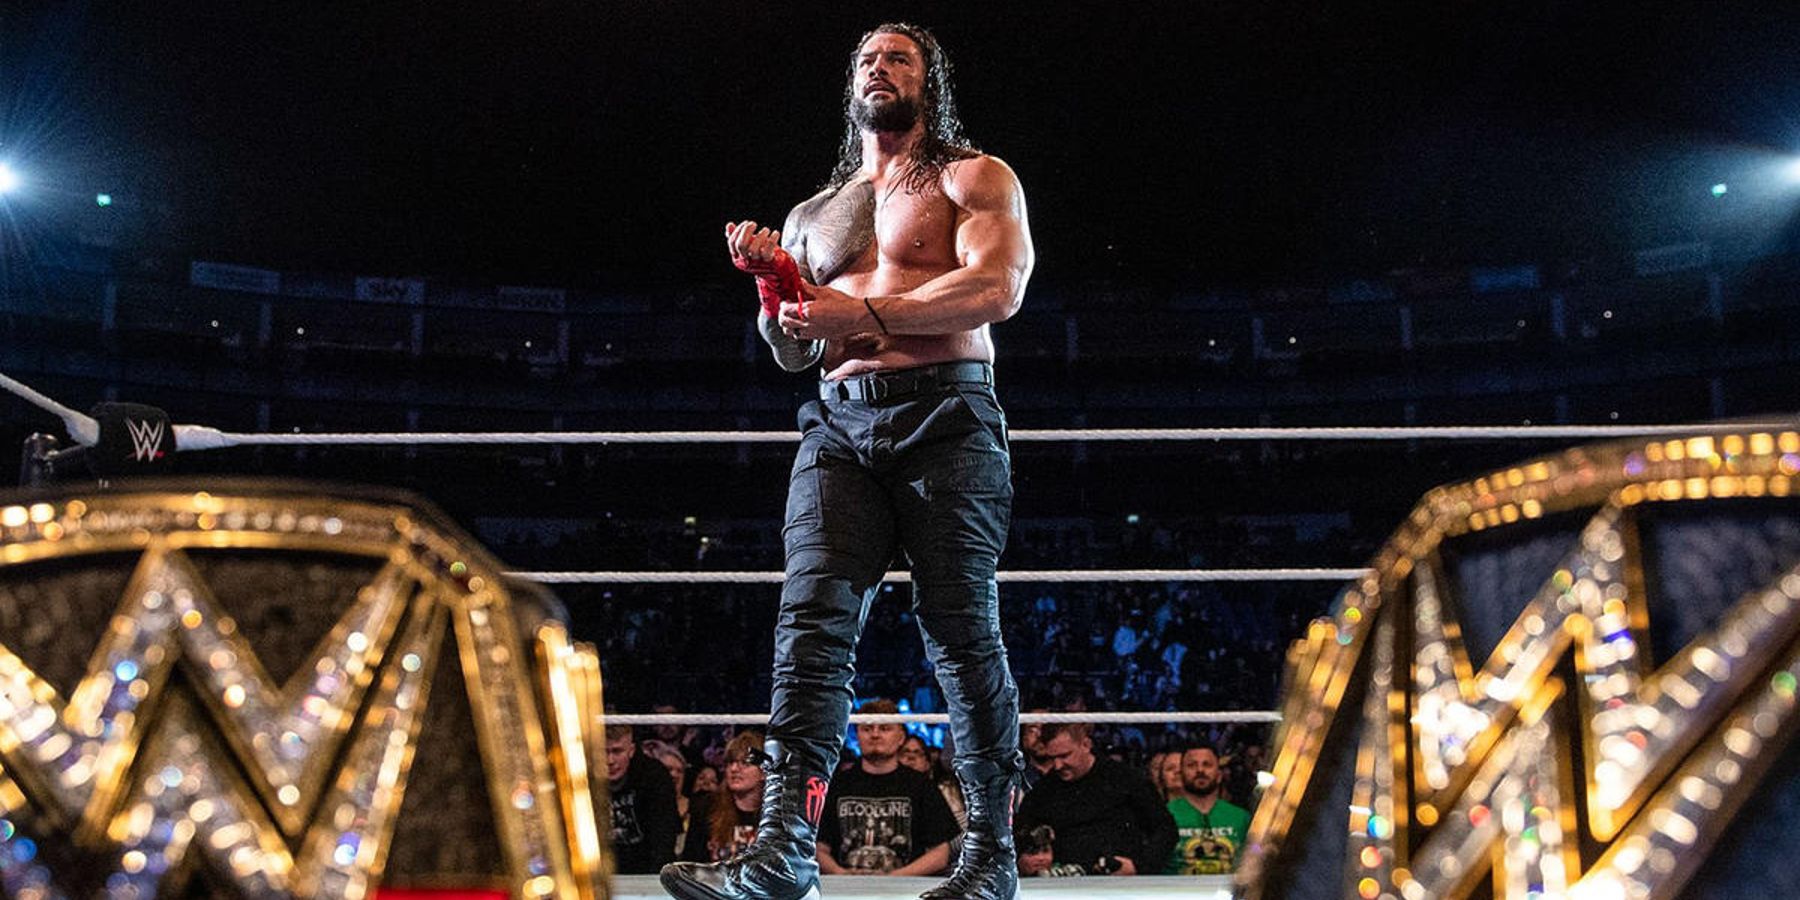 Roman Reigns prepares for a match in 2022 with the WWE Championship and Universal Championship in the foreground.